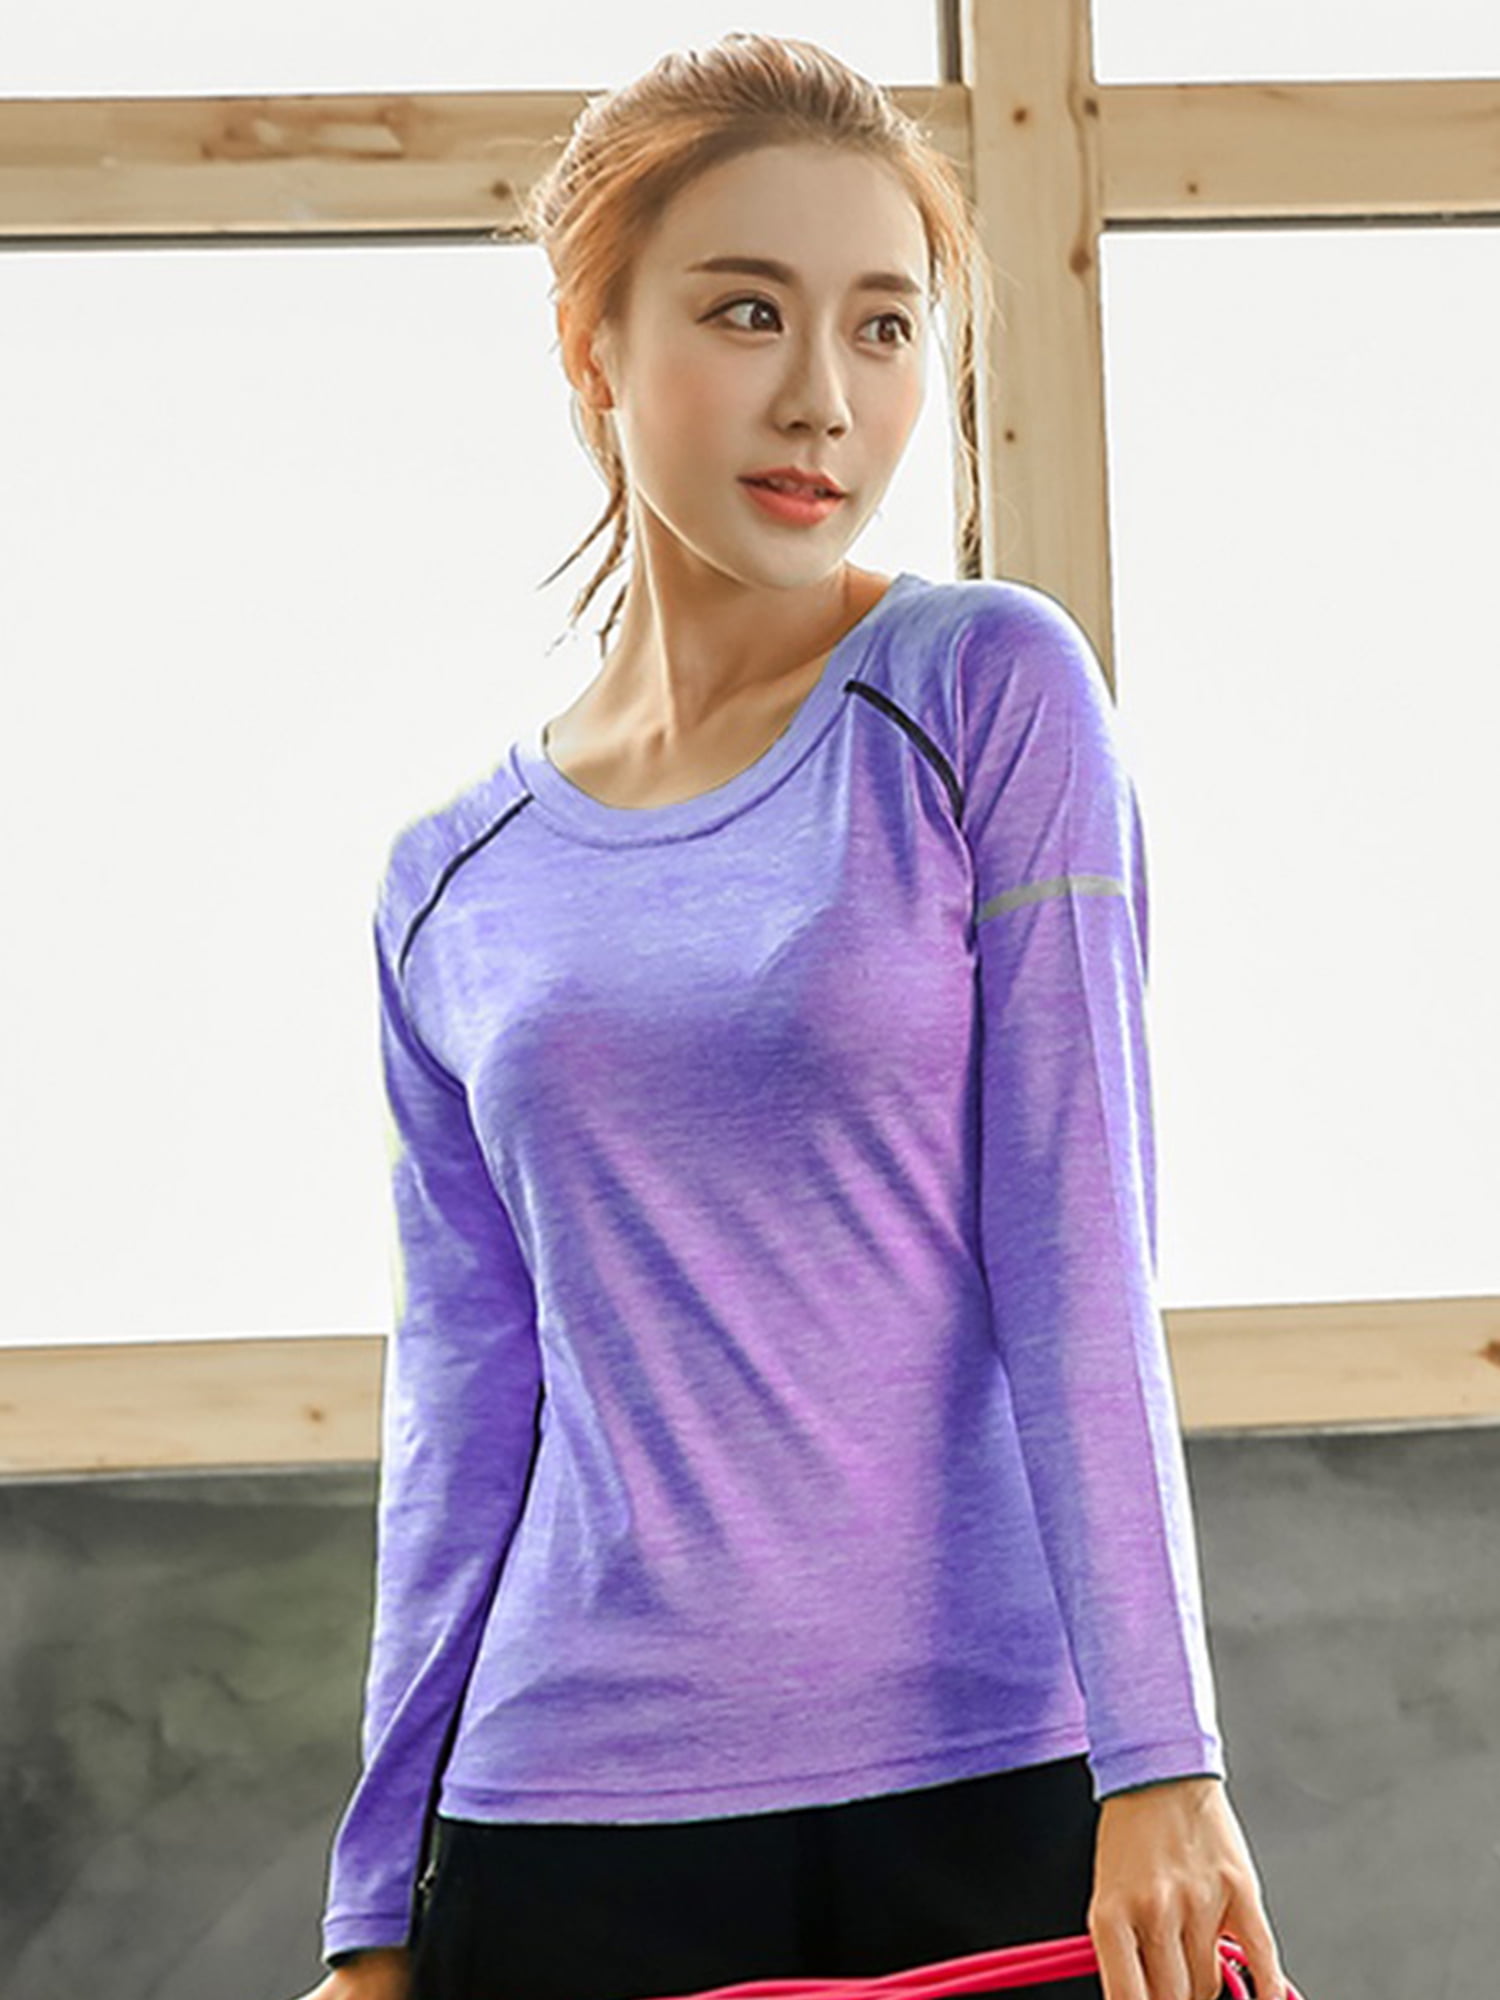 DODOING Women's Fashion Fitness Blouse Tops Casual Long Sleeve Shirt ...